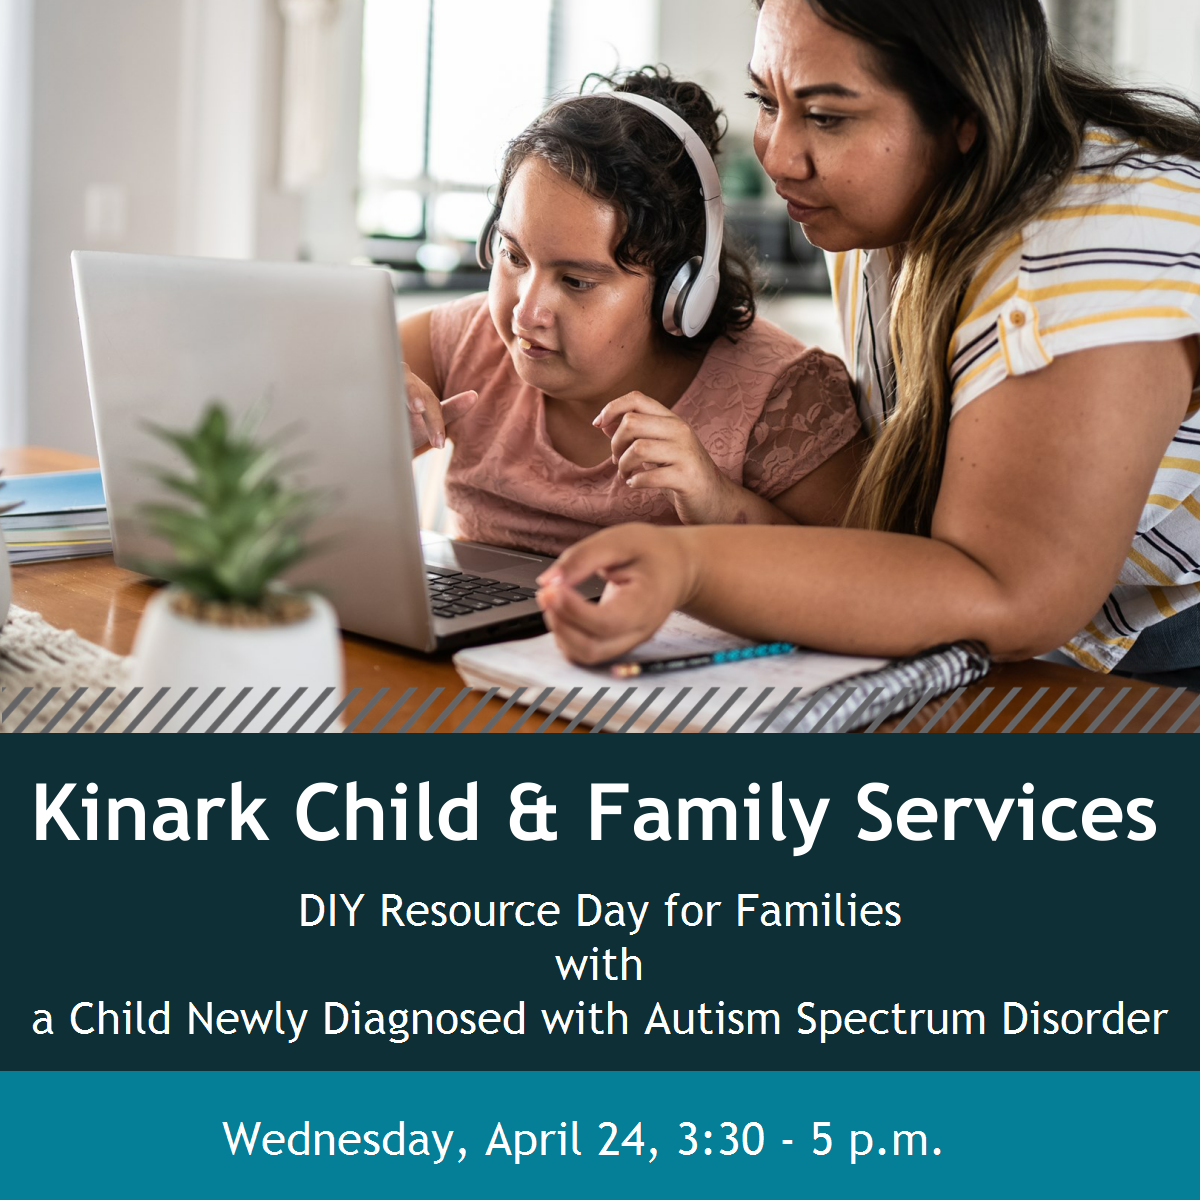 Photo of woman and child, looking at laptop. Text reads: Kinark CHild & Family Services. DIY Resource Day for Families with a child newly diagnosed with Autism Spectrum Disorder. Wednesday, April 22 3:30-5 p.m.